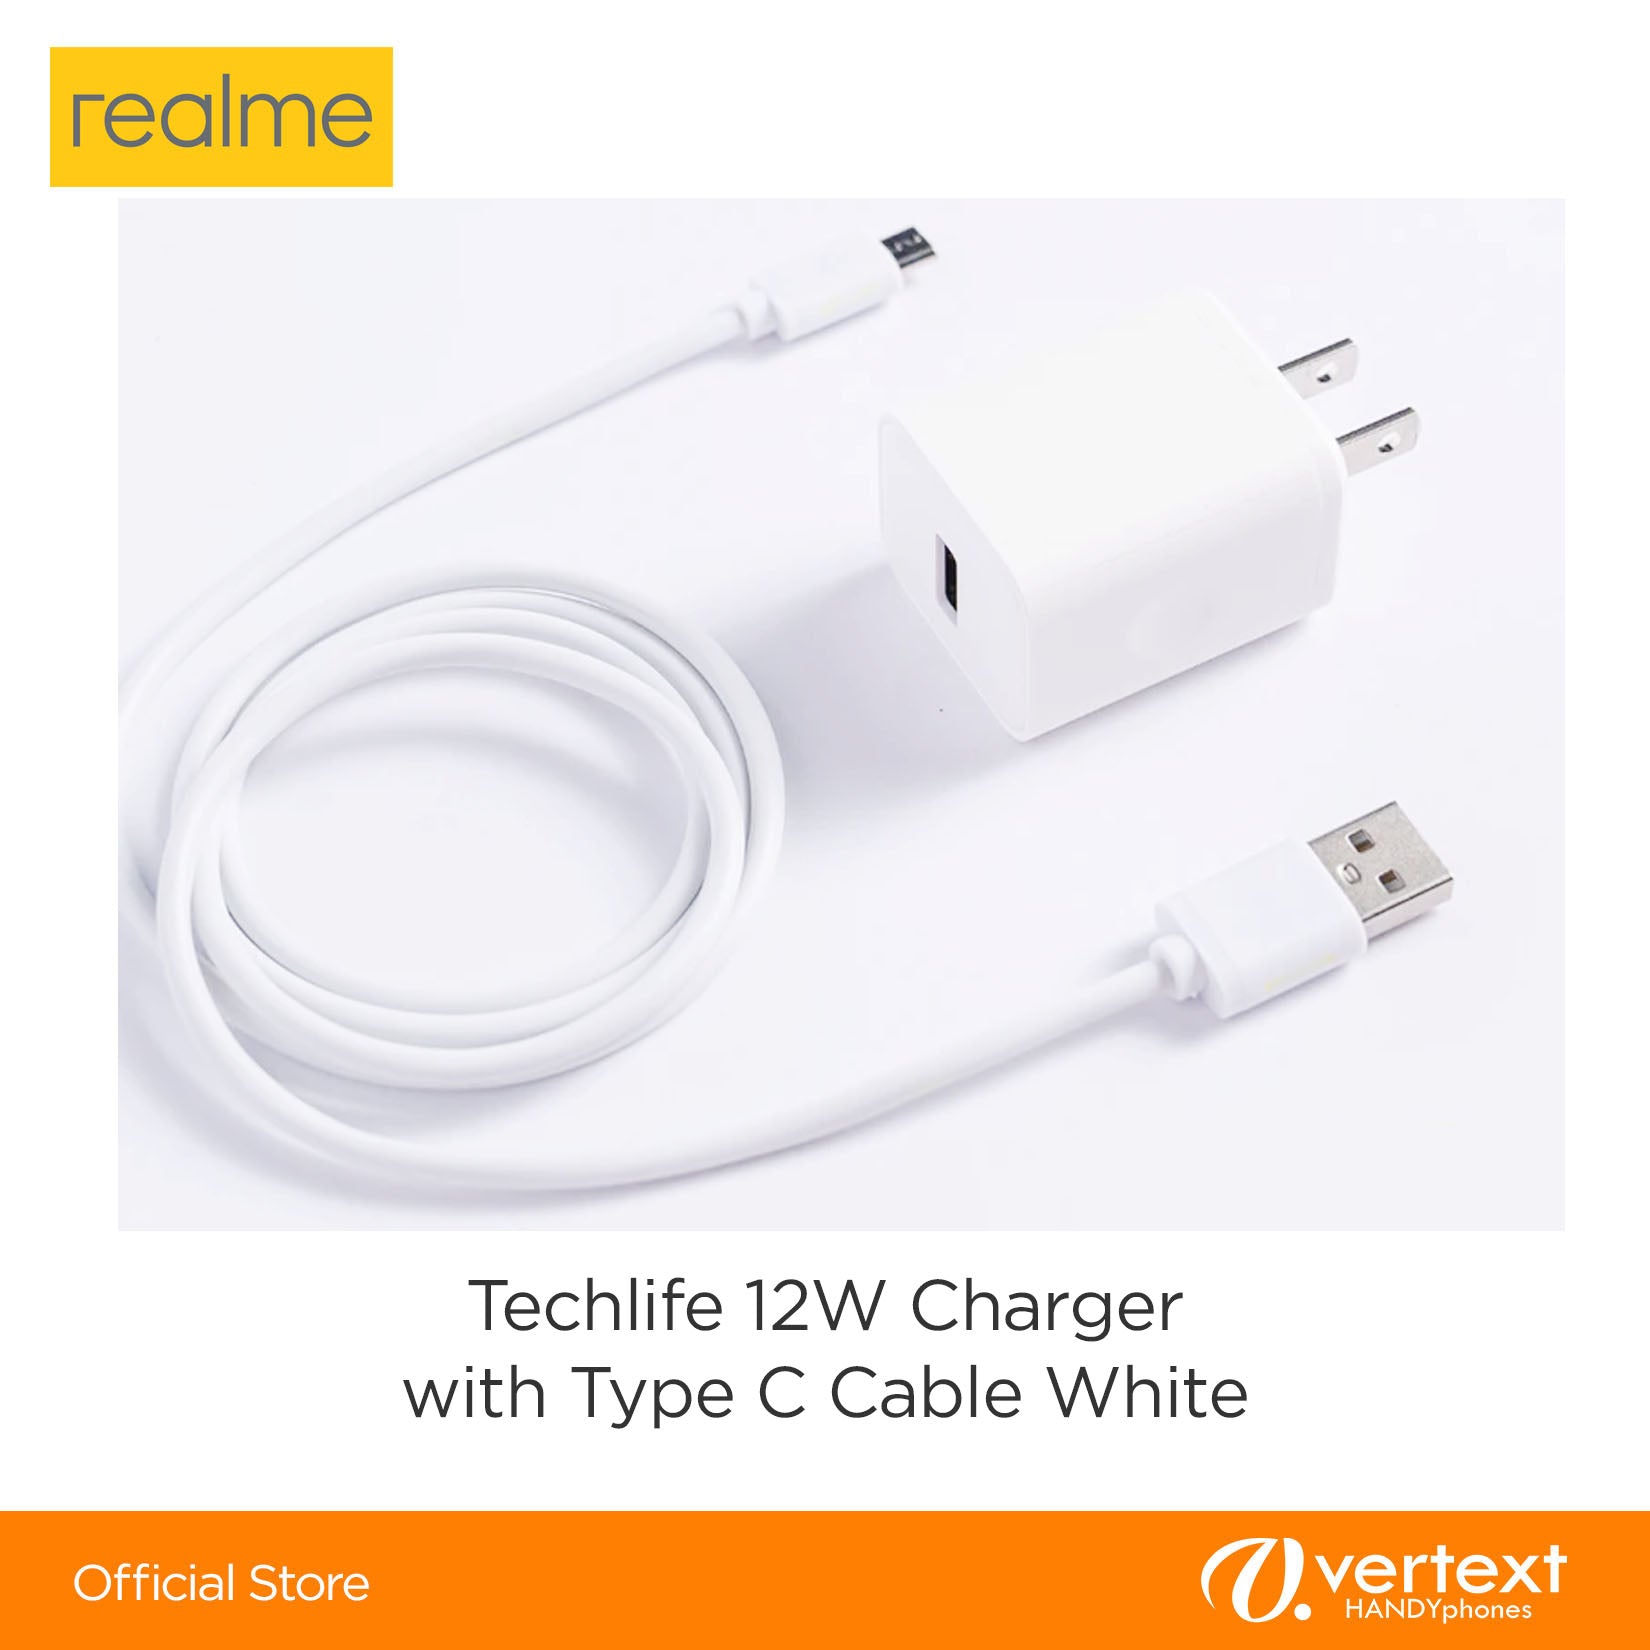 TECHLIFE 12W CHARGER